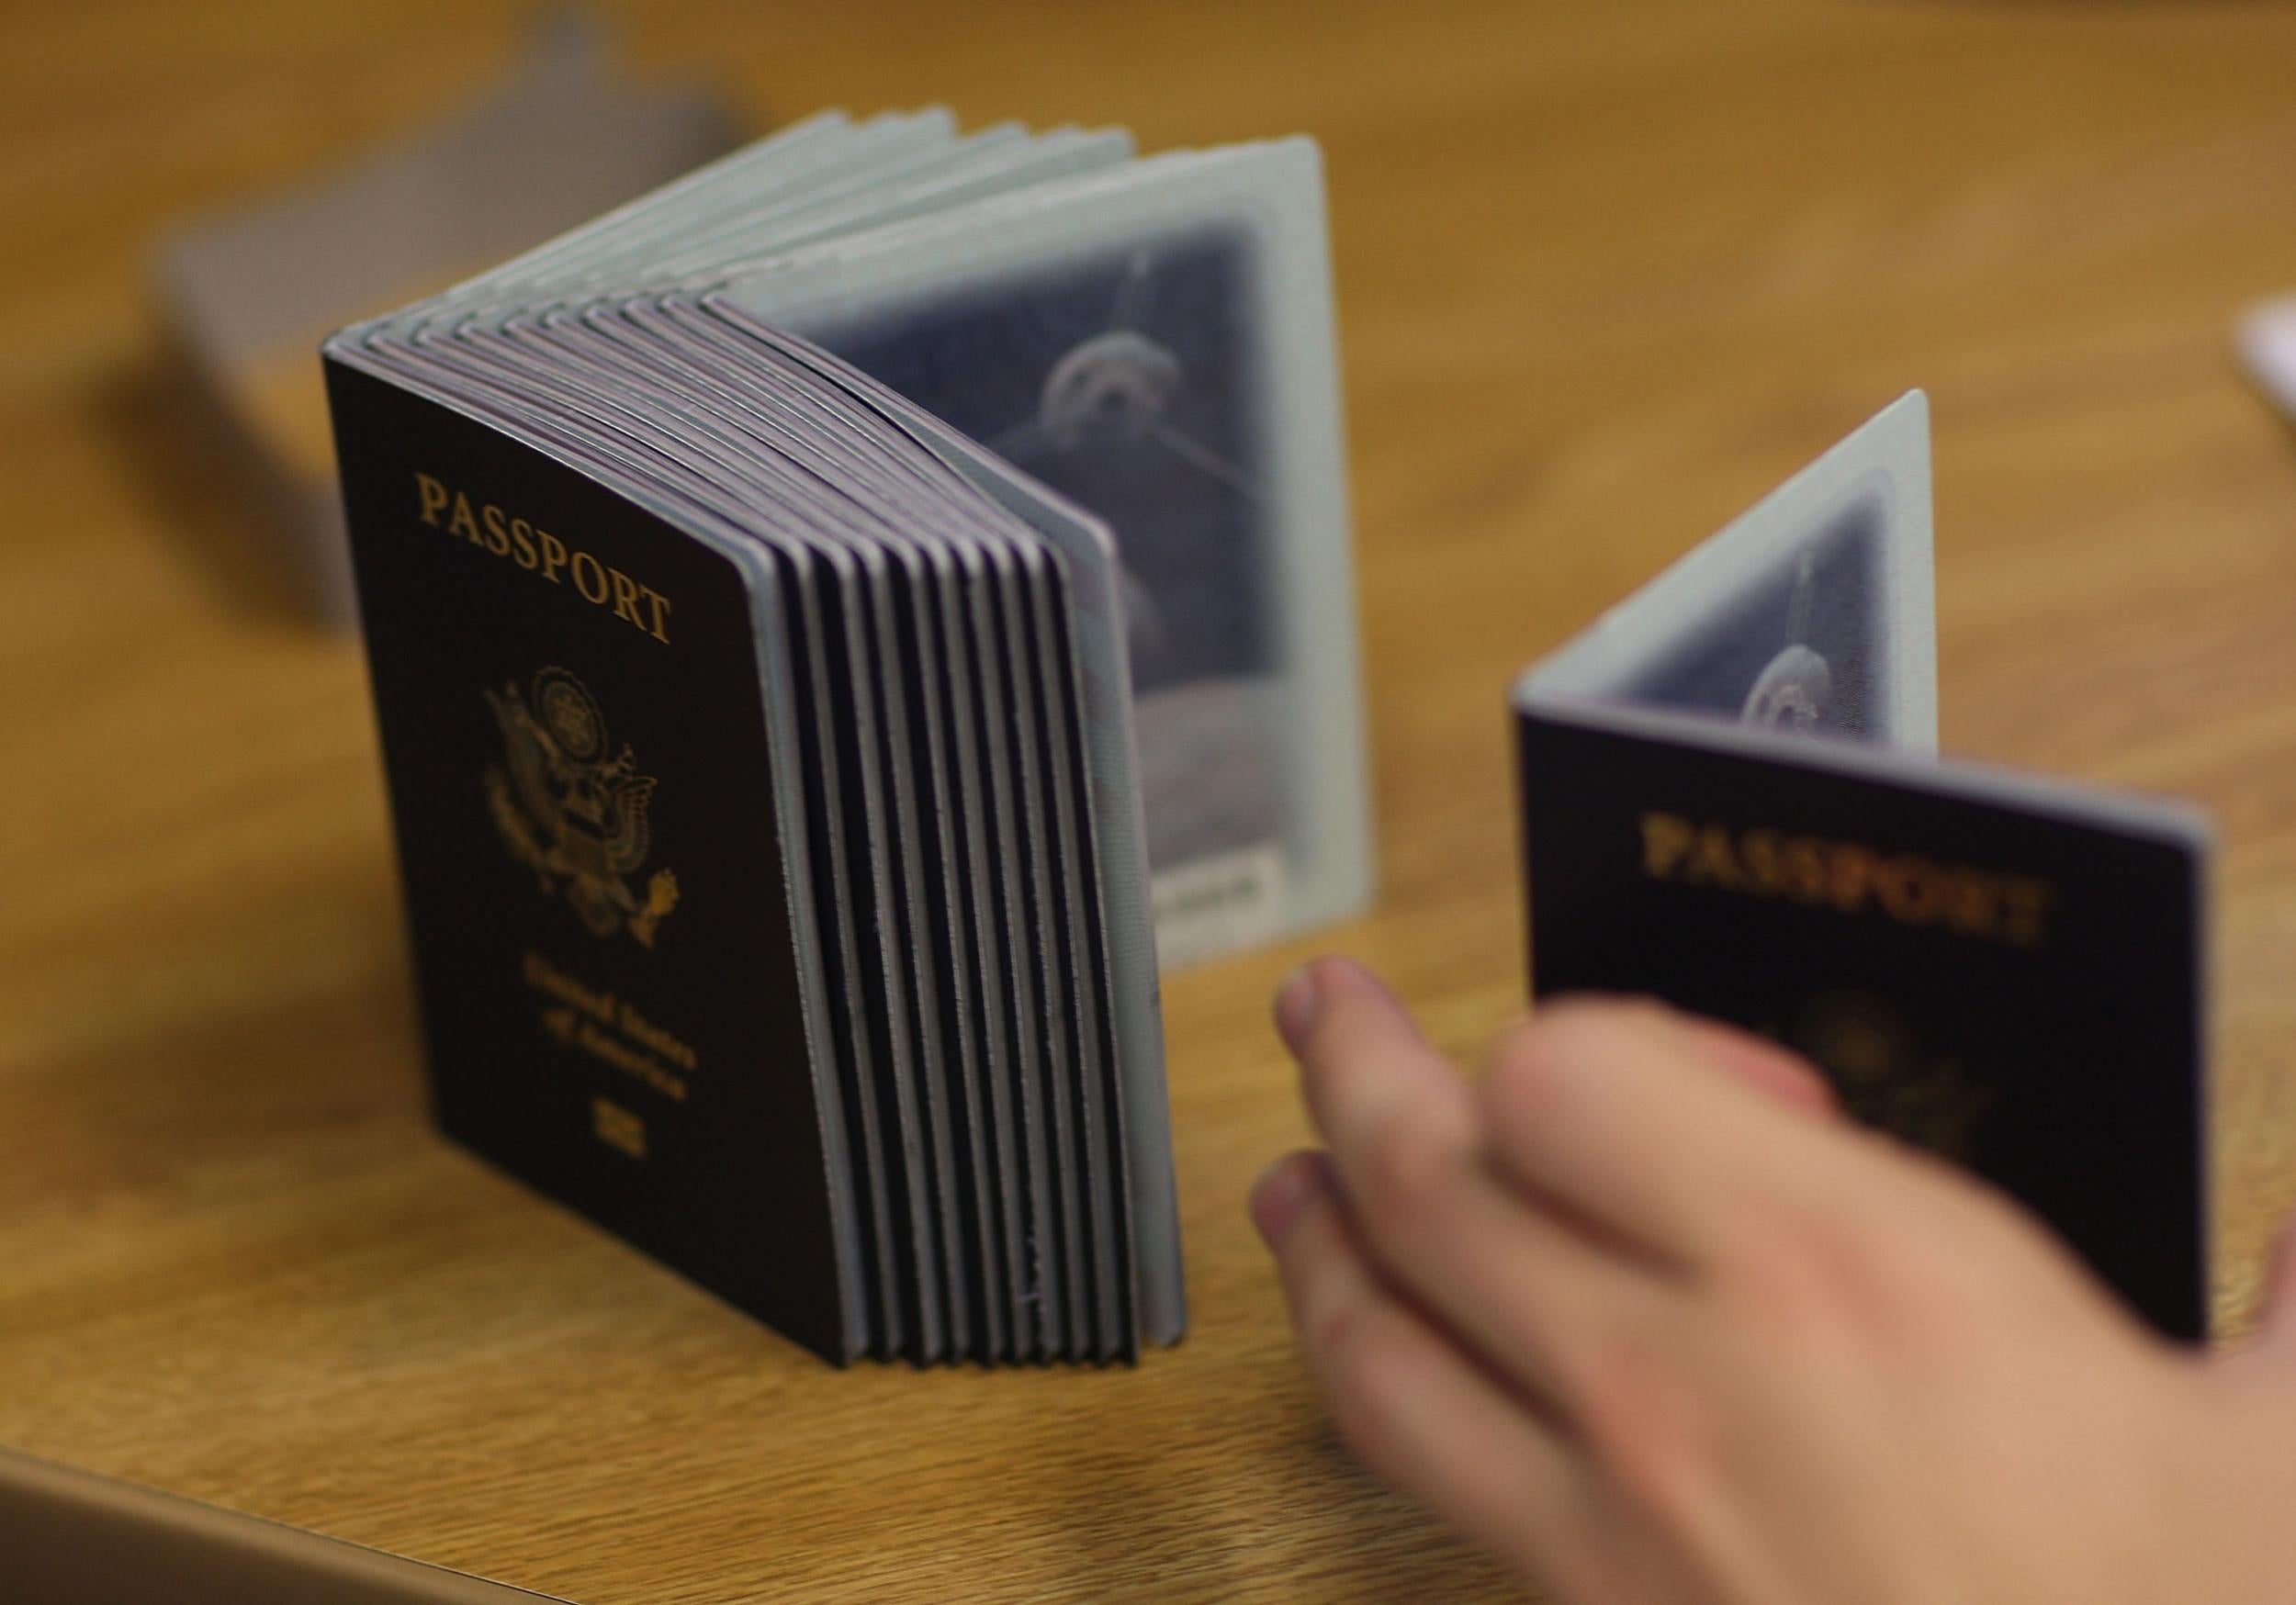 A Passport Processing employee uses a stack of blank passports to print a new one at the Miami Passport Agency